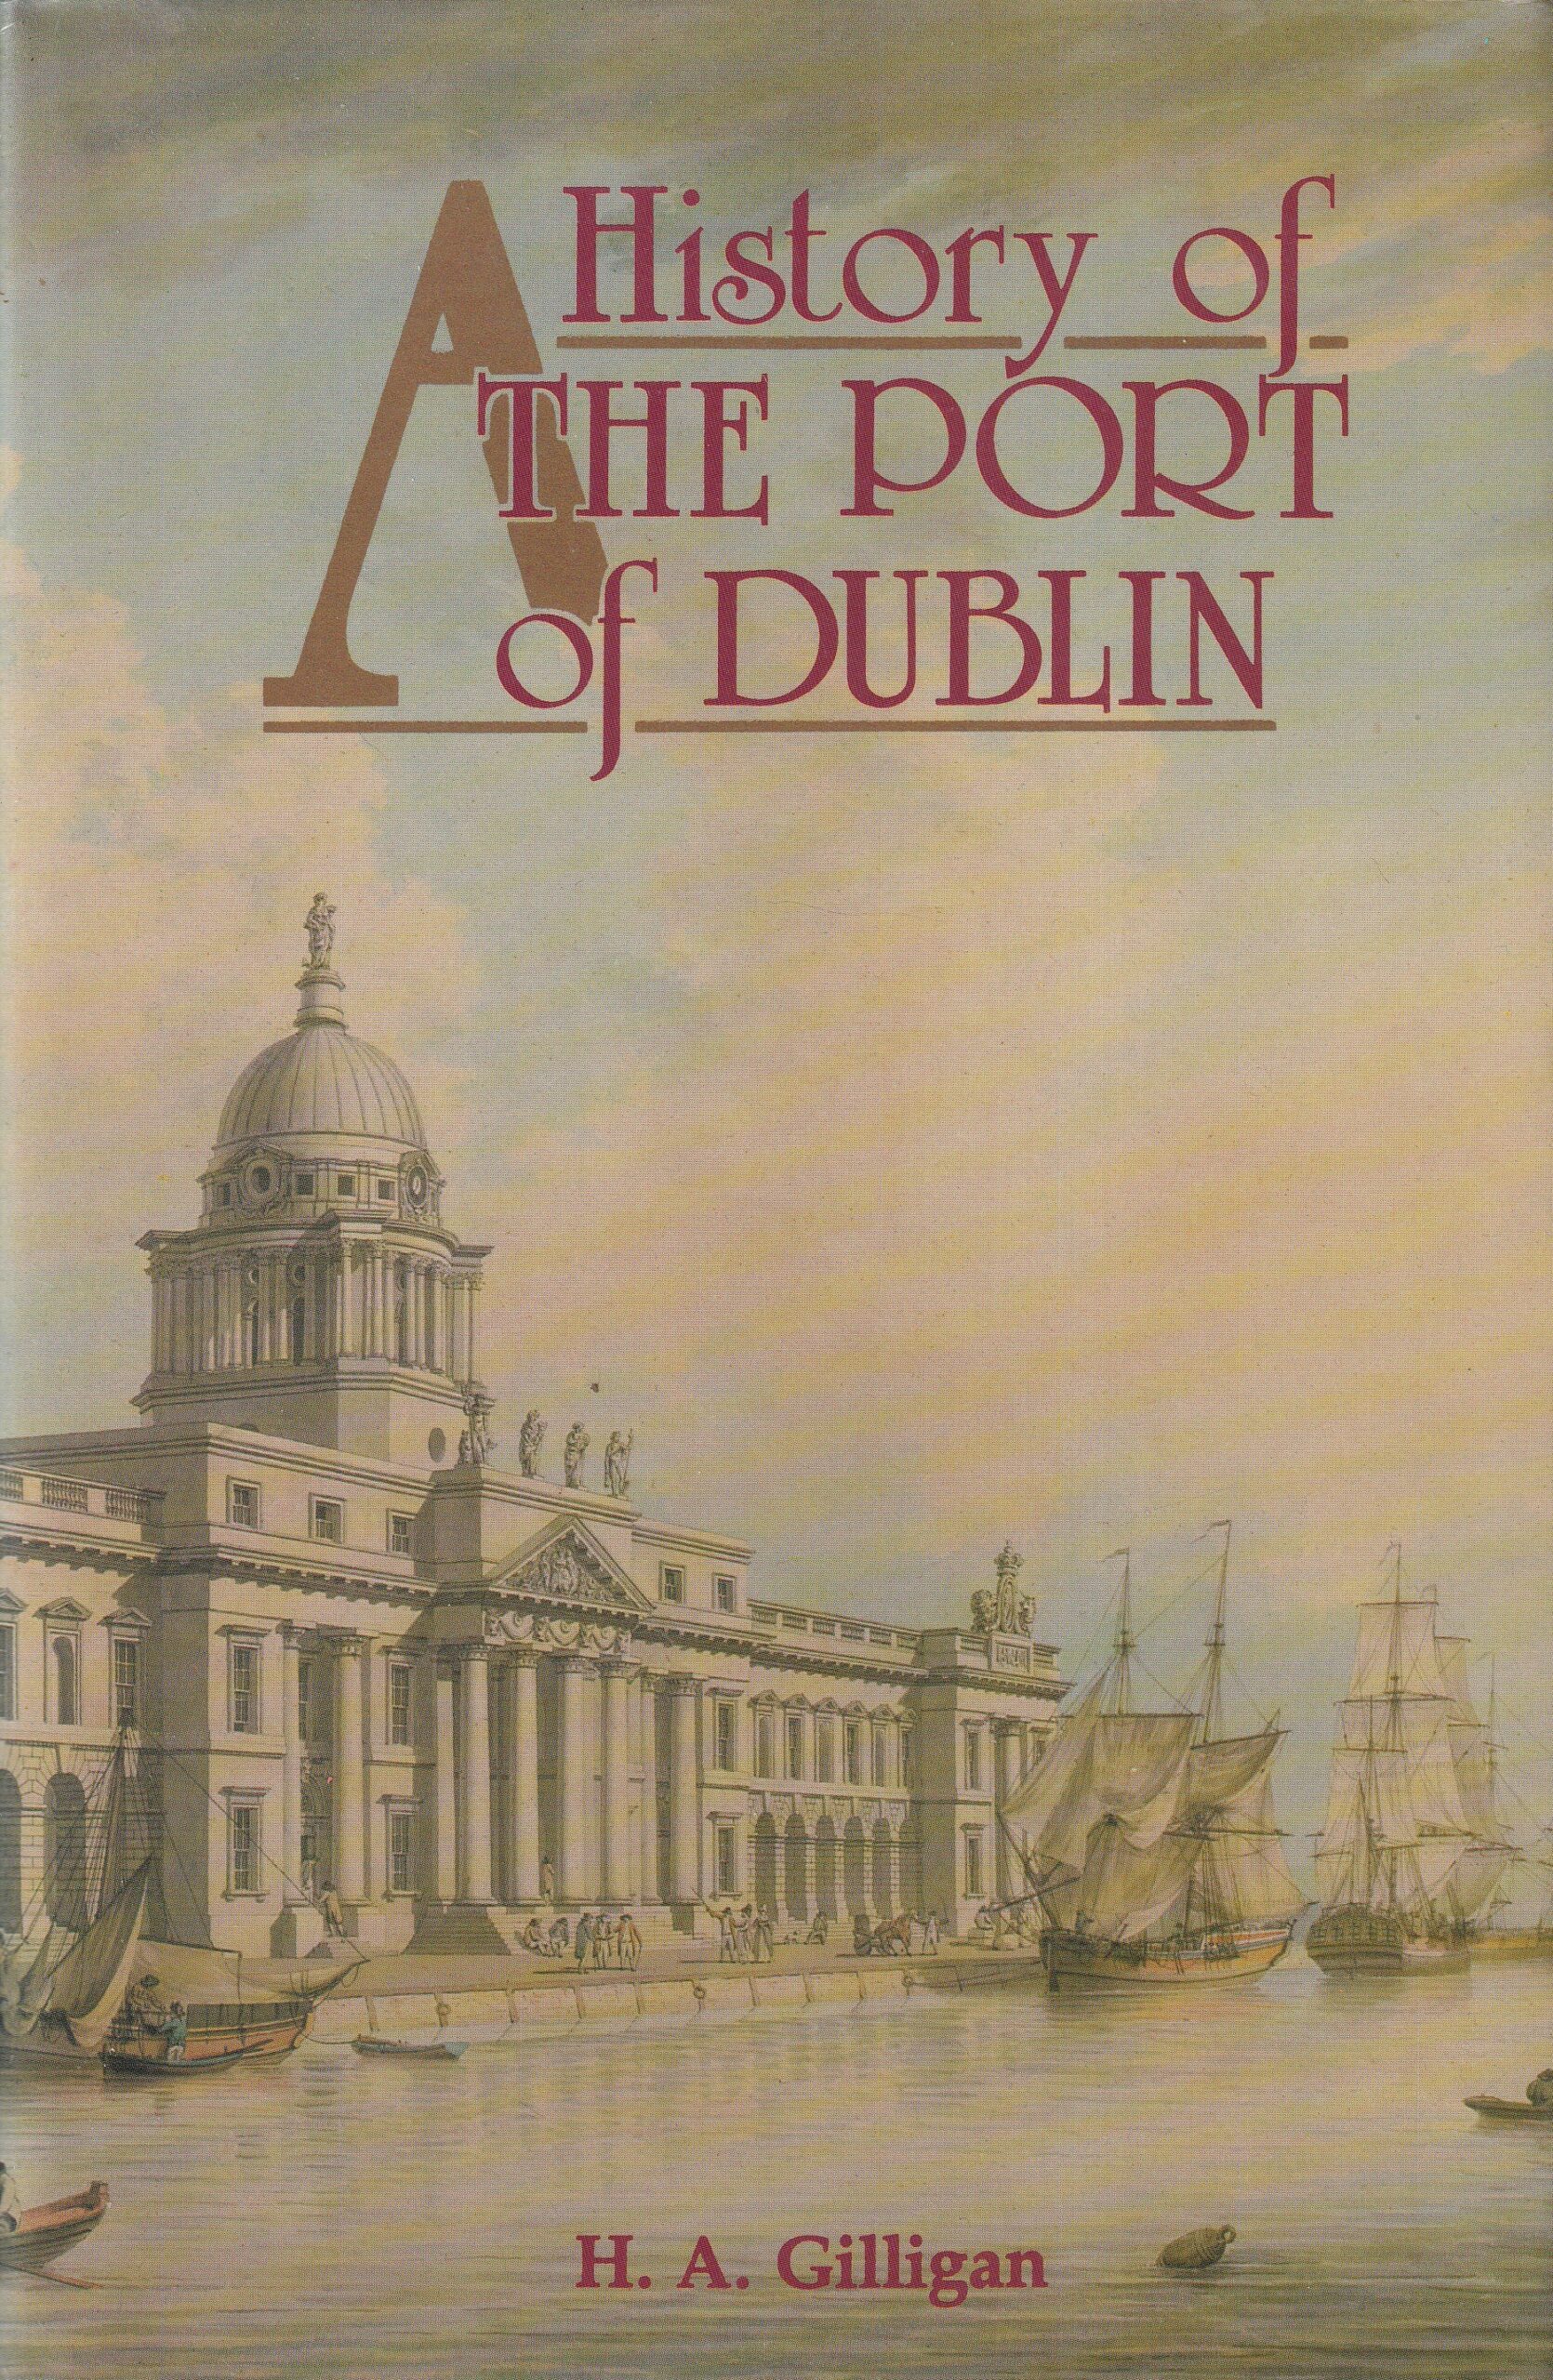 A History of the Port of Dublin | H. A. Gilligan | Charlie Byrne's